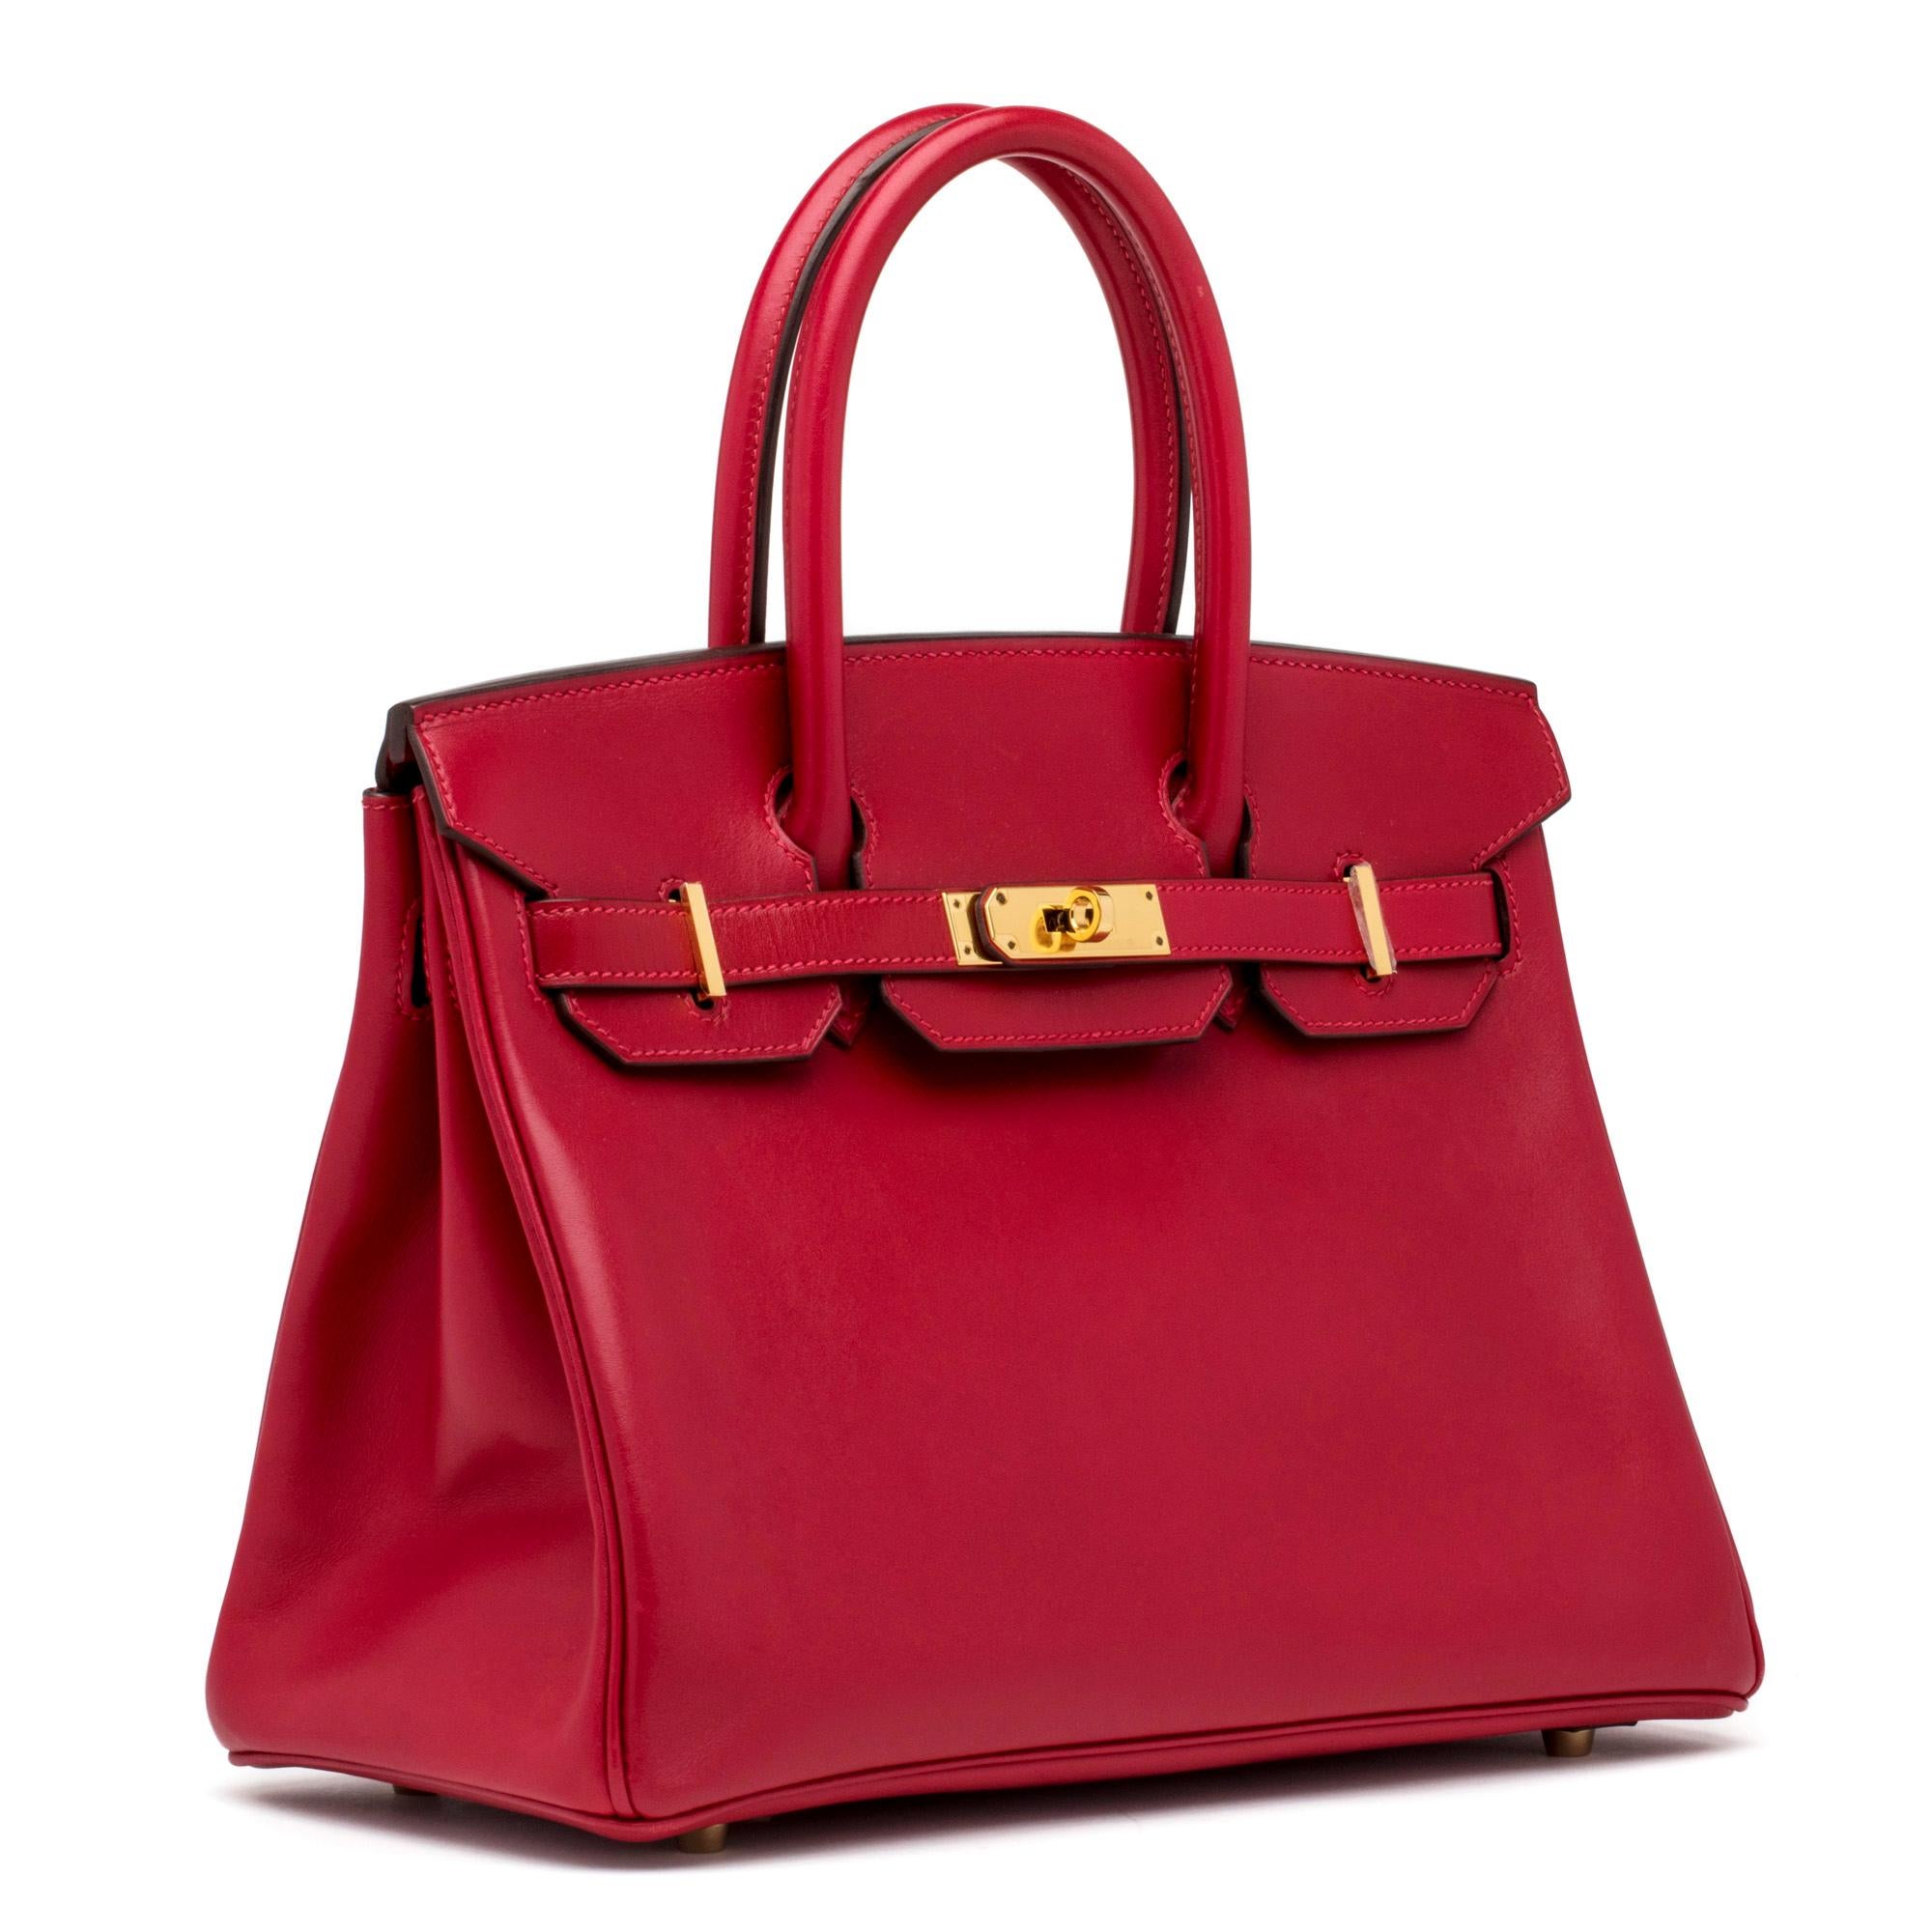 The Hermés Birkin bag embodies the quintessence of style and luxury due to its impeccable design, craftsmanship, and significance. That being said, it is the most iconic and desired piece from the Hermés handbag collection.